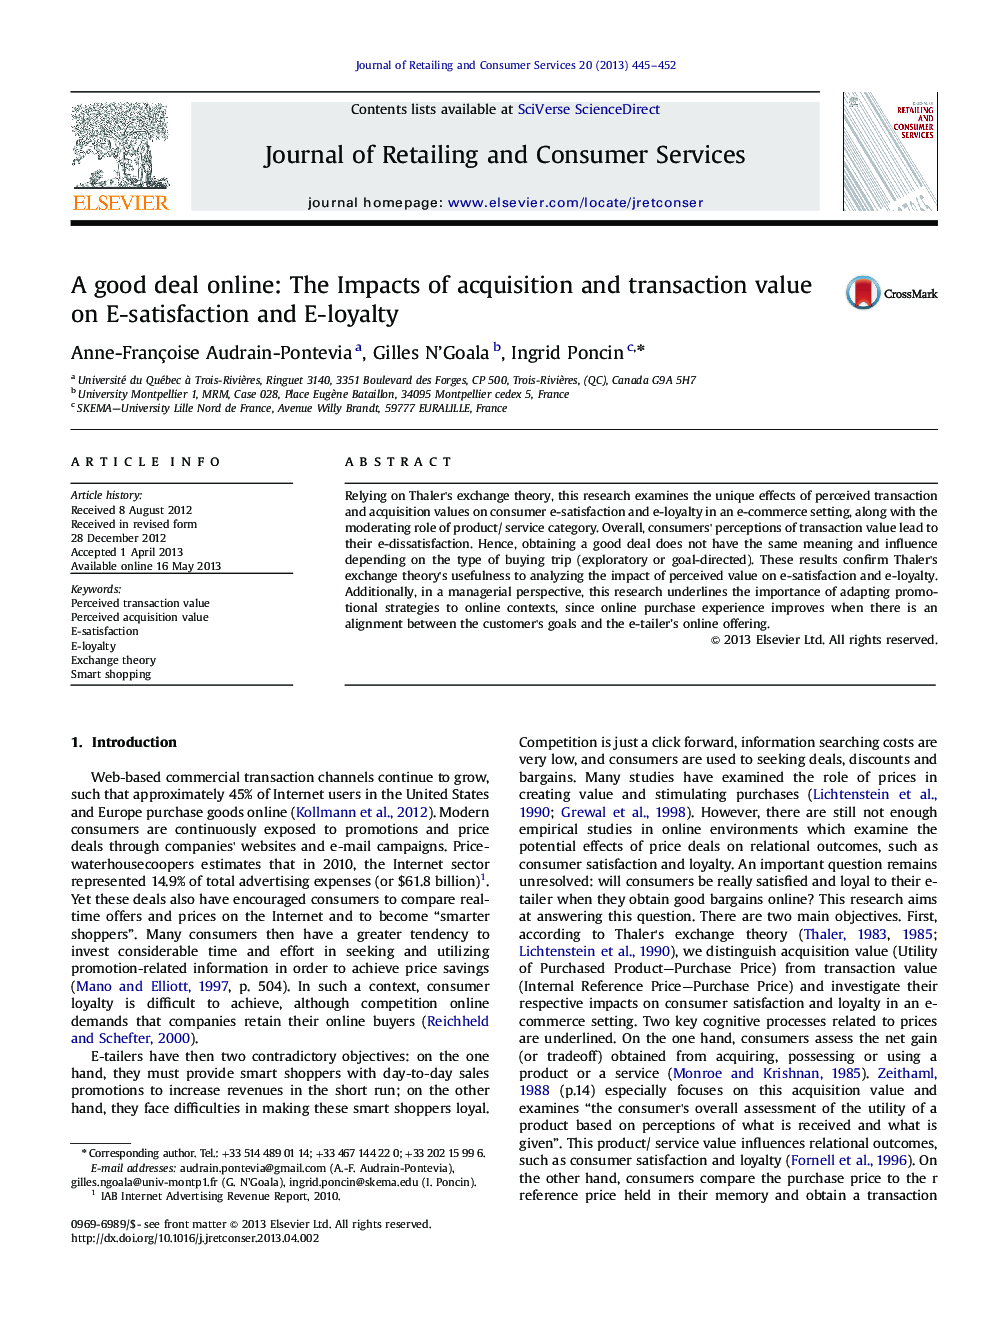 A good deal online: The Impacts of acquisition and transaction value on E-satisfaction and E-loyalty